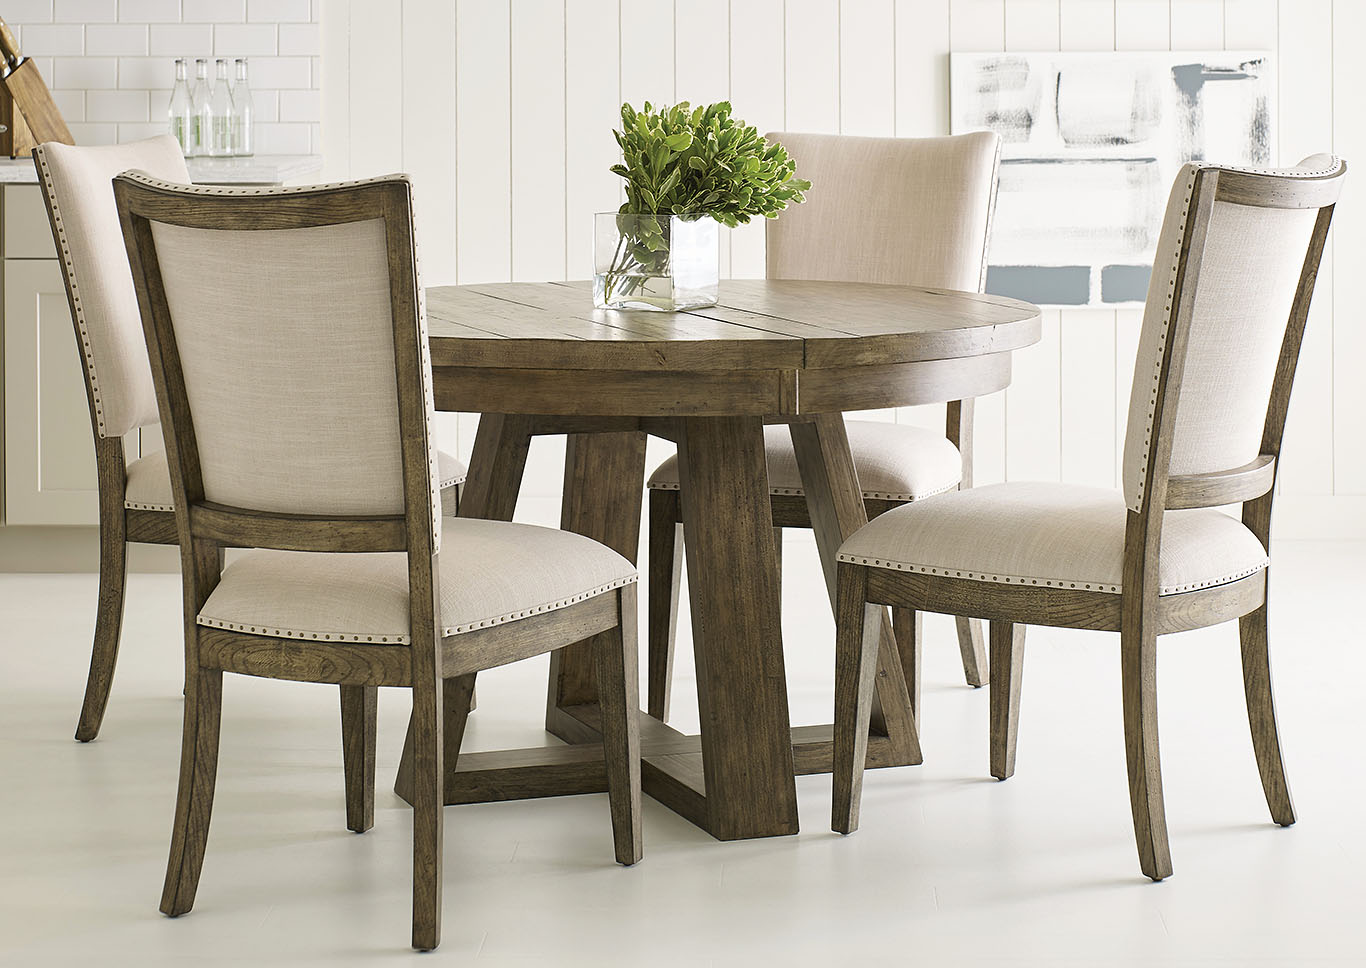 Plank Road Stone Round Dining Set w/4 Side Chairs,Kincaid